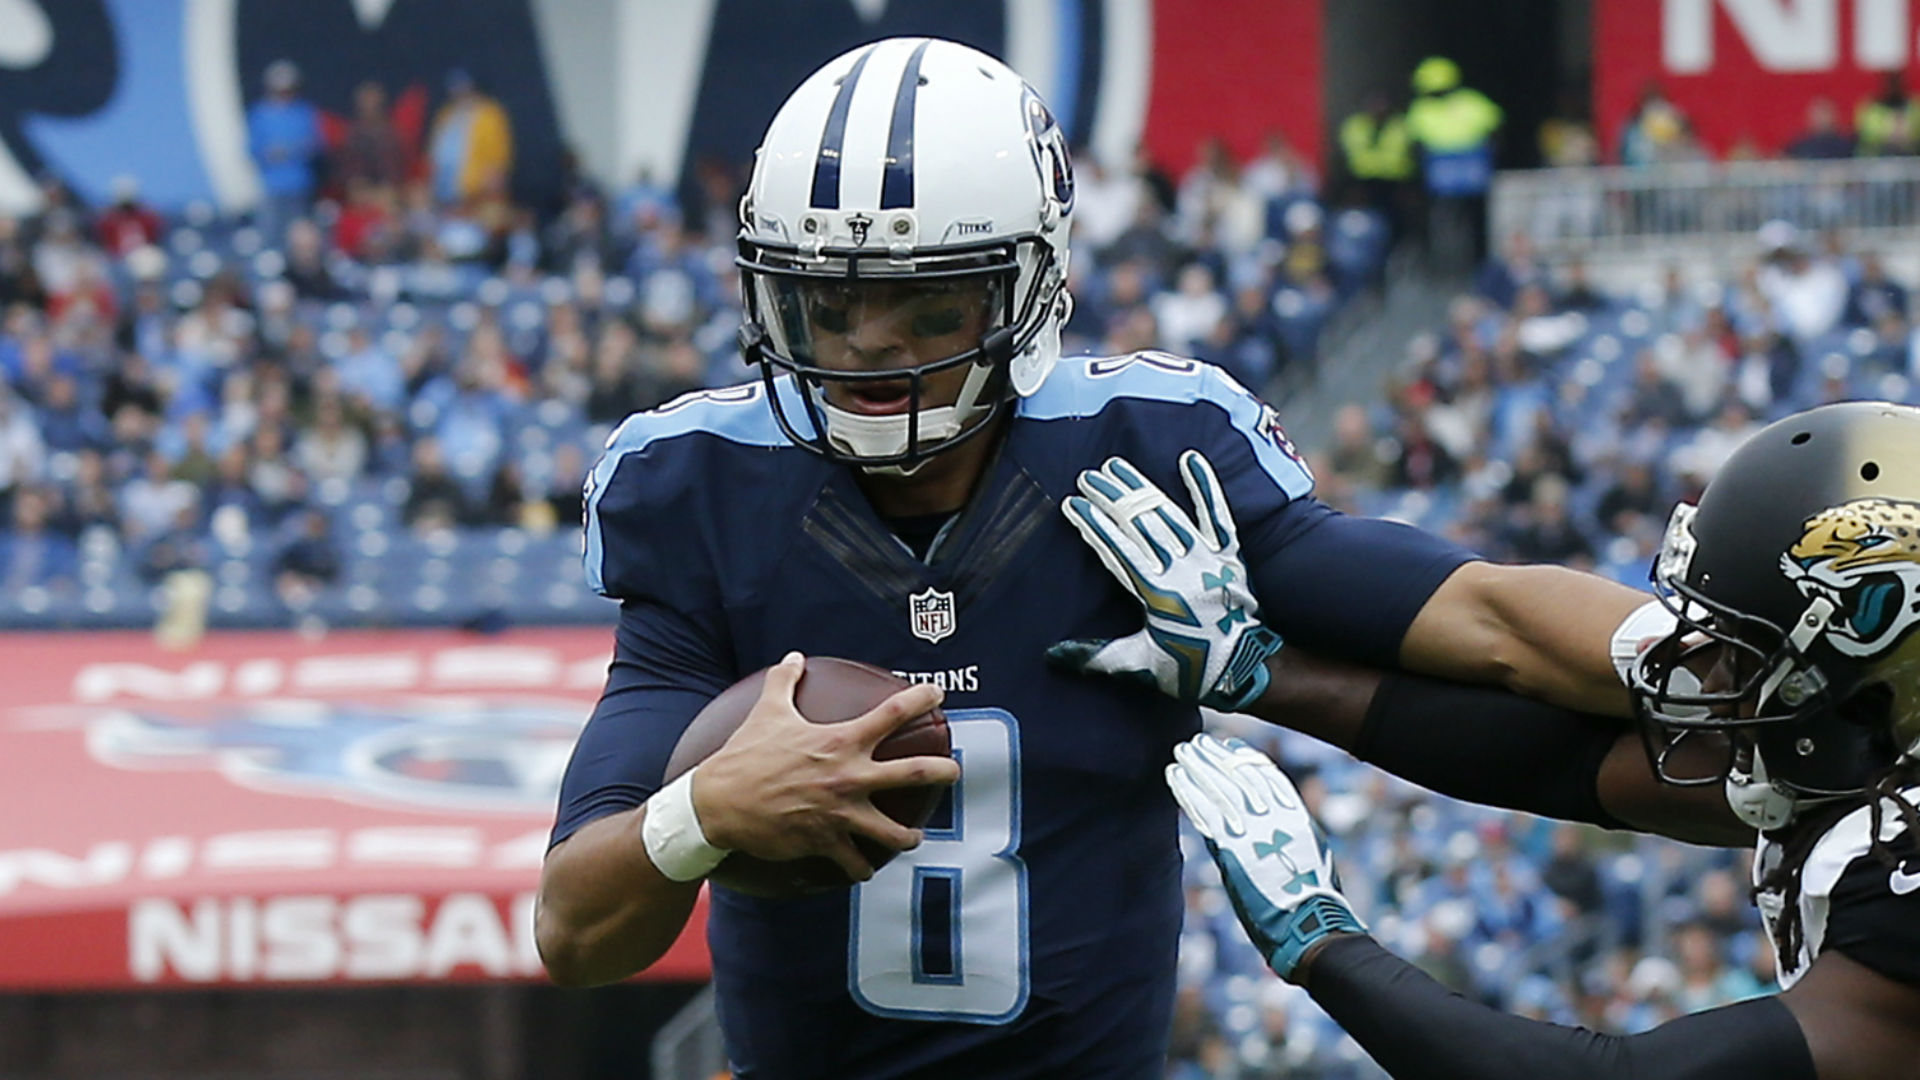 Marcus Mariota gets lit up by Derrick Johnson, fumble not ruled a fumble